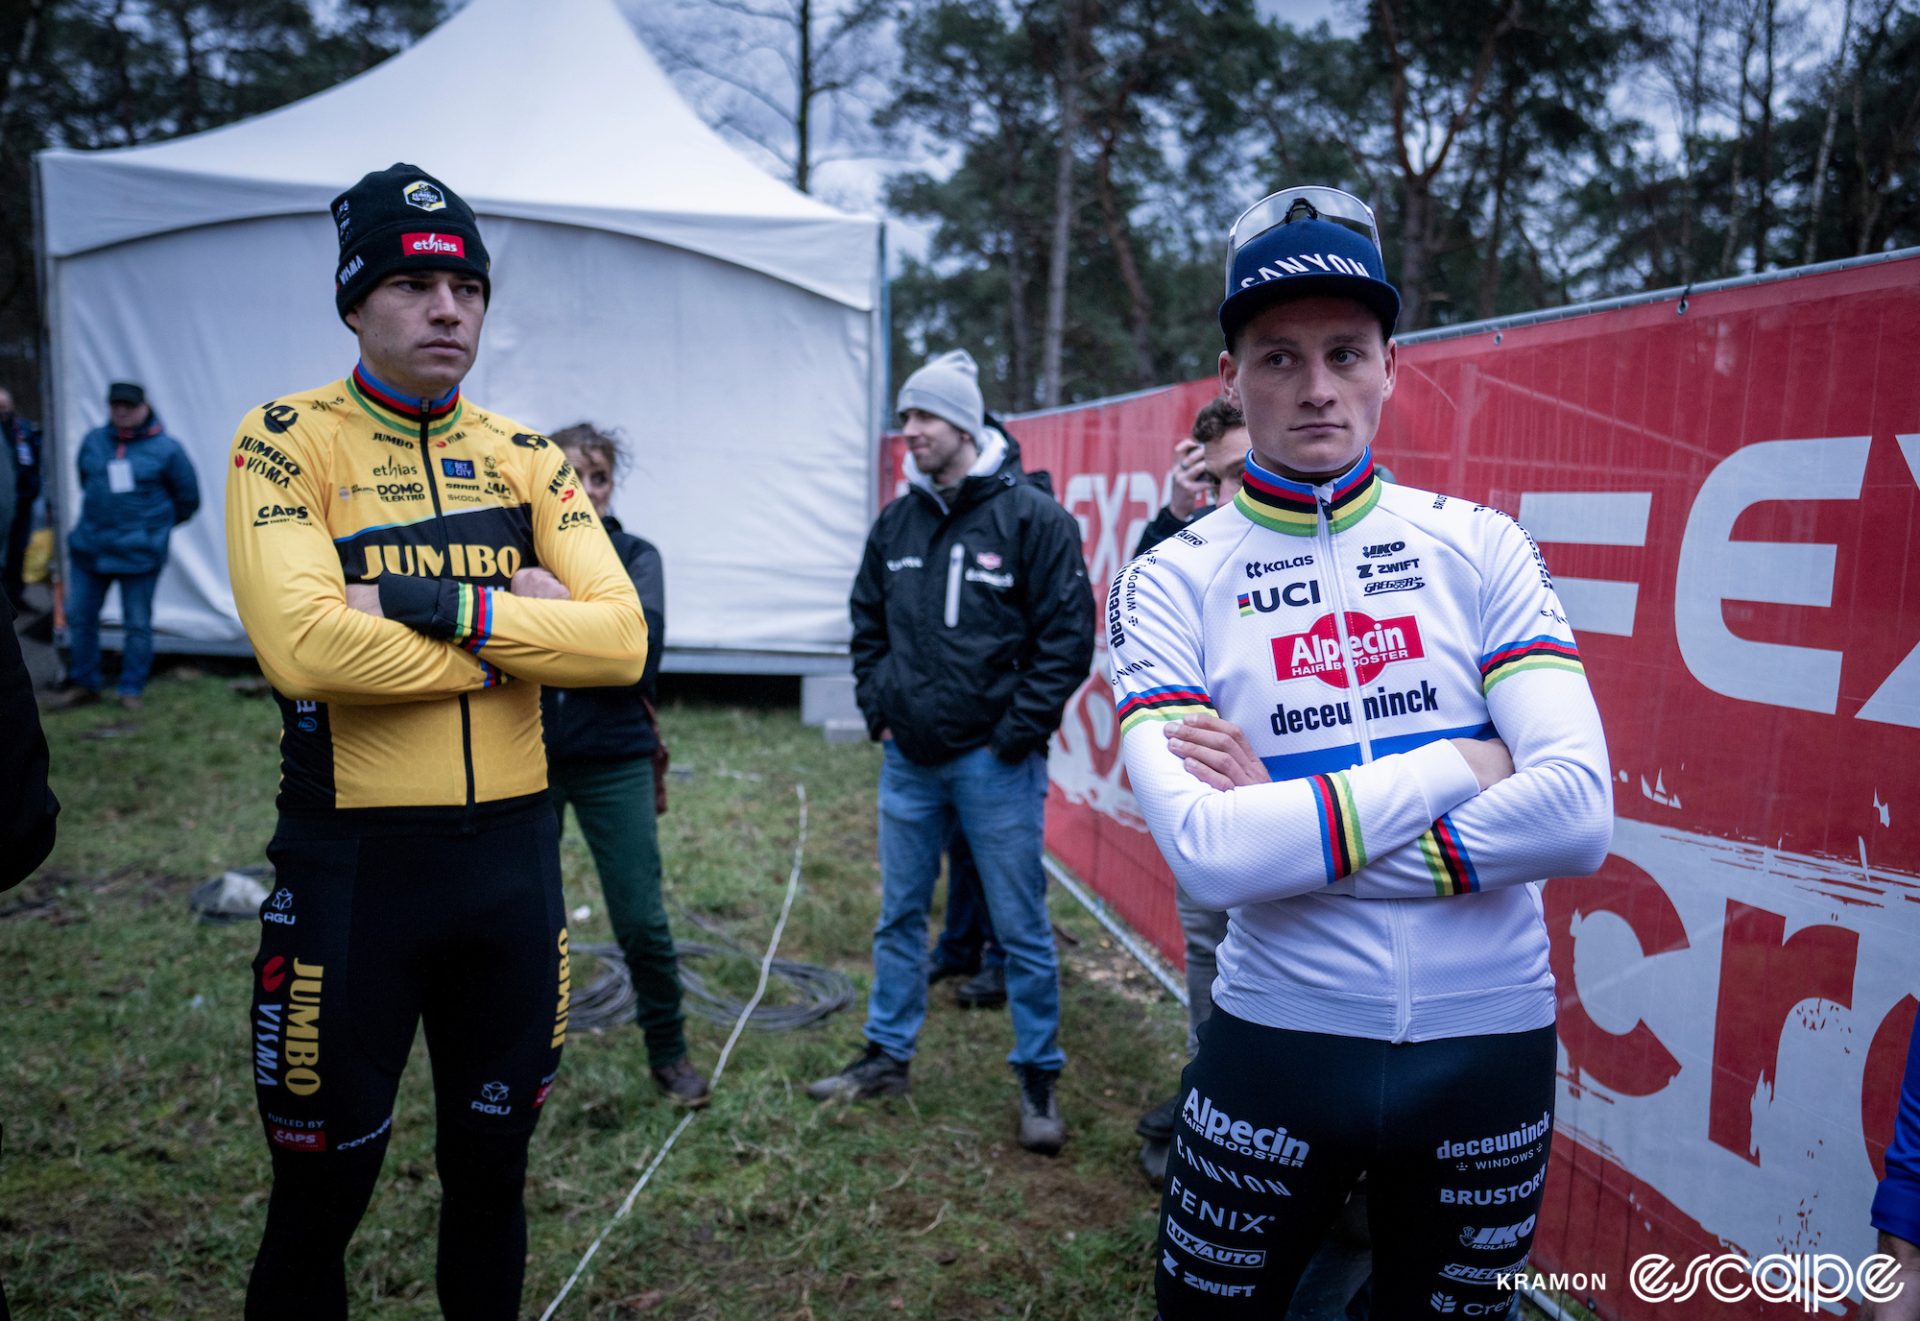 Wout van Aert casts a sidelong glance at Mathieu van der Poel post-race. They're both standing with arms crossed waiting for the podium.